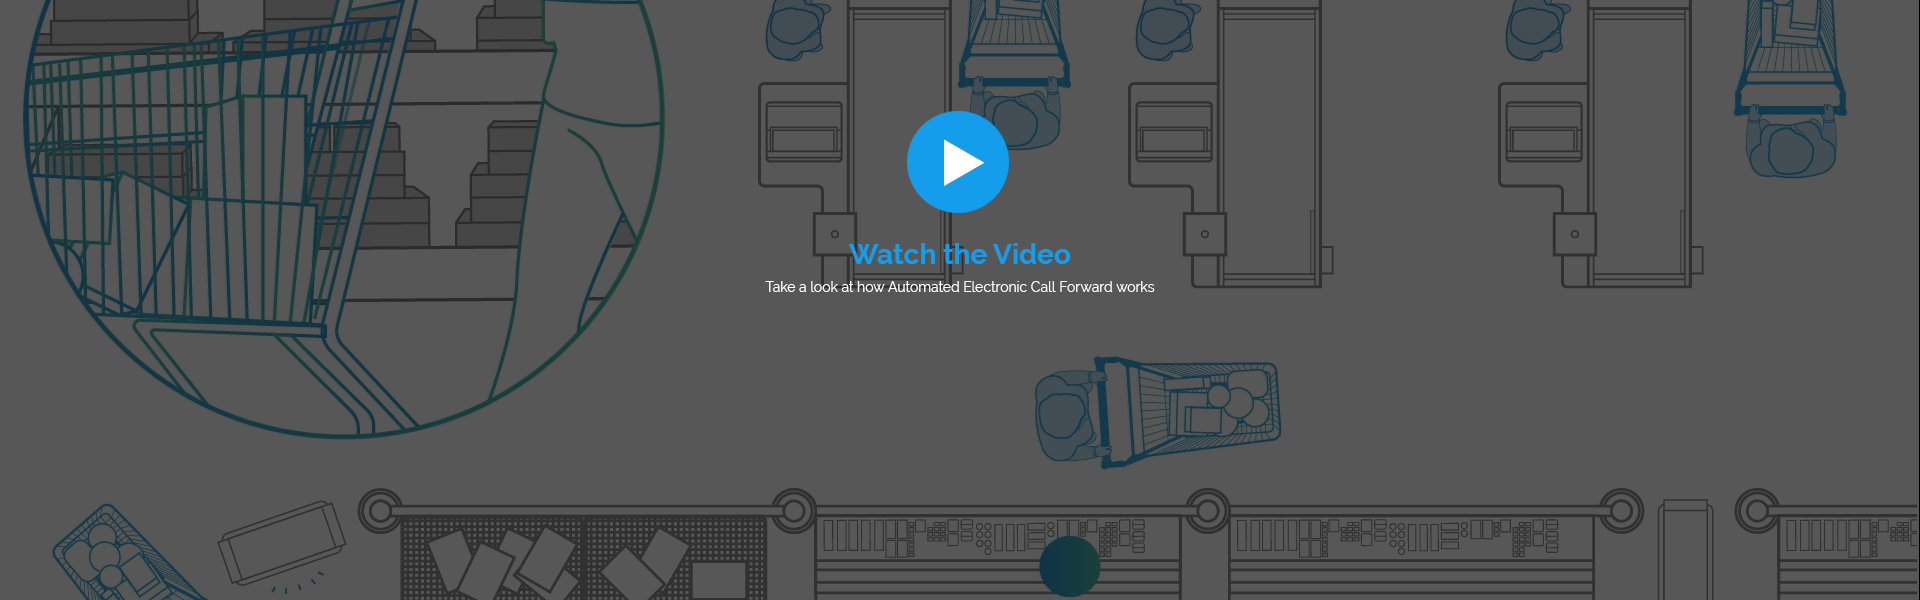 Automated Electronic Call Forward Video